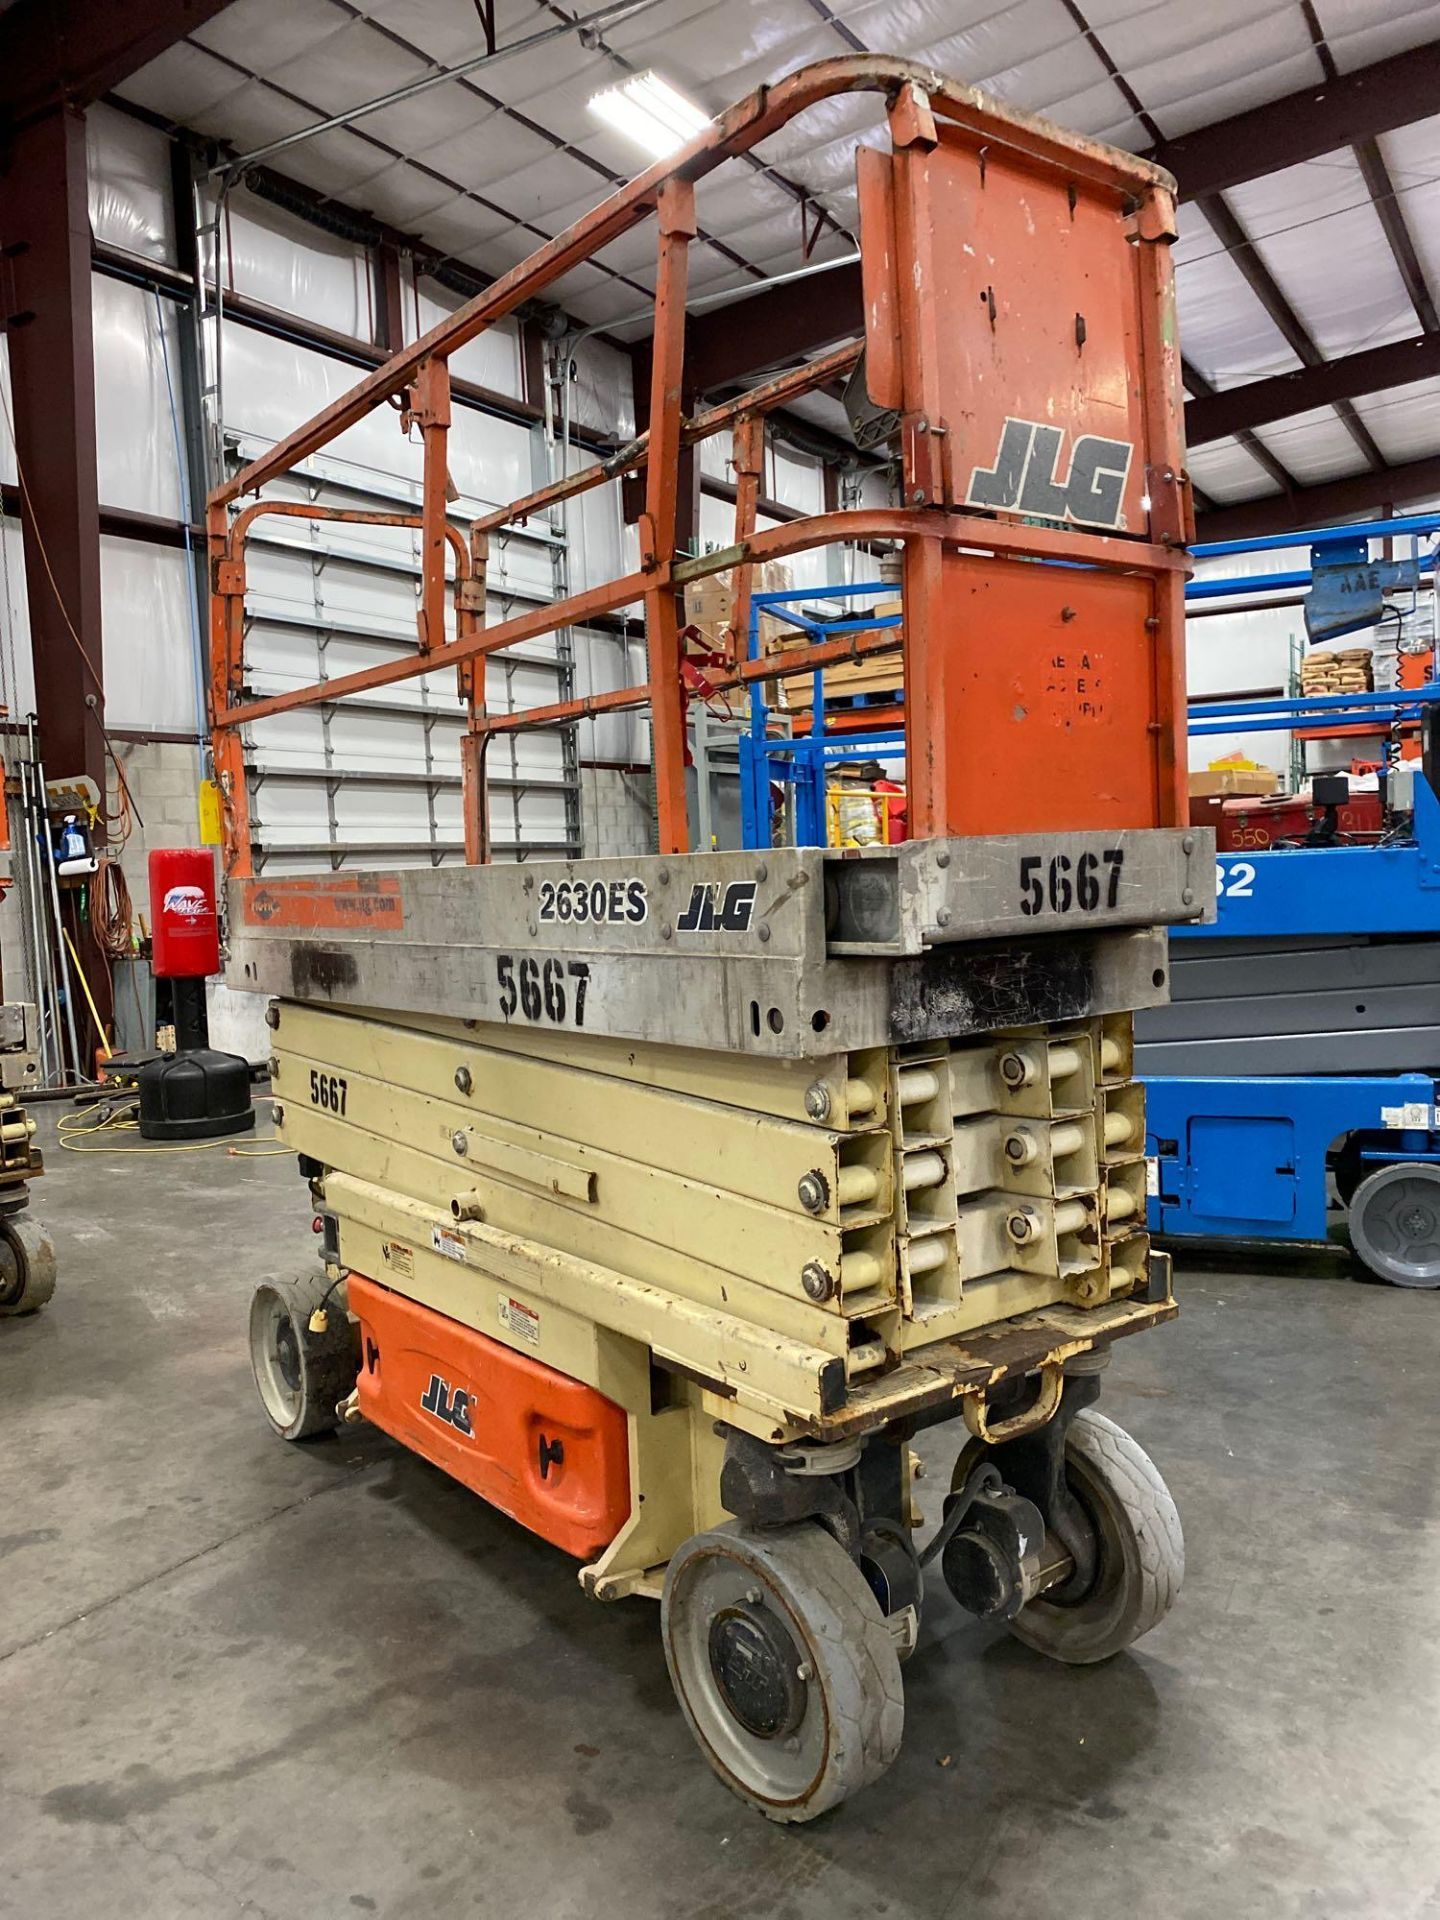 JLG 2630ES ELECTRIC SCISSOR LIFT, SELF PROPELLED, 26' PLATFORM HEIGHT, BUILT IN BATTERY CHARGER, RUN - Image 5 of 14